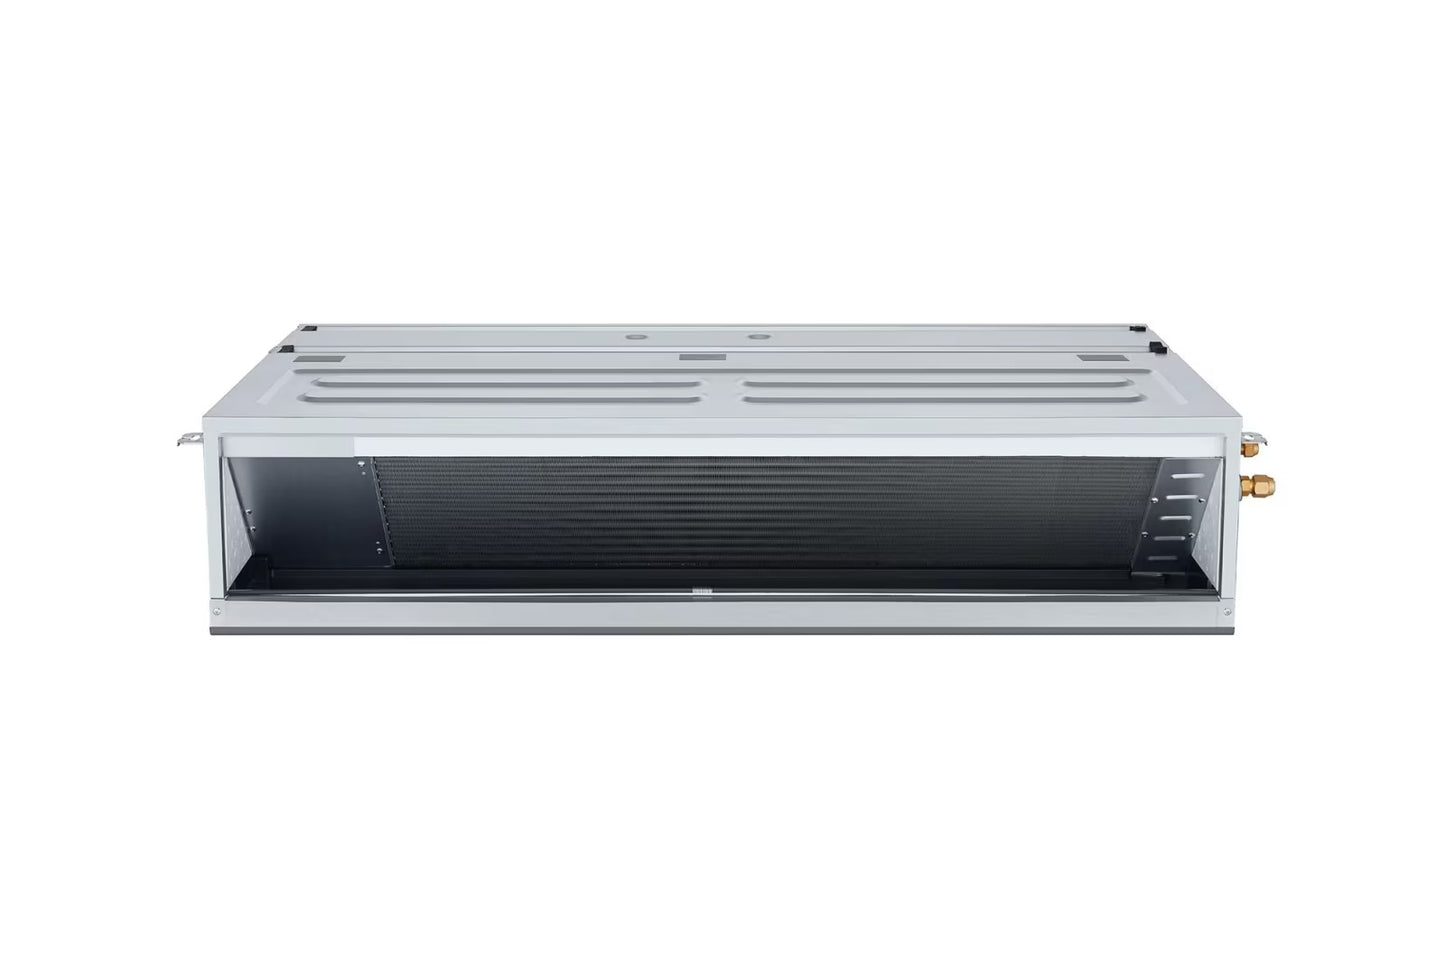 LG Ceiling Concealed Duct INV Unit 14.1KW with Mid Static and E.S.P. Control for Multiple Rooms - ARNU48GM3A4